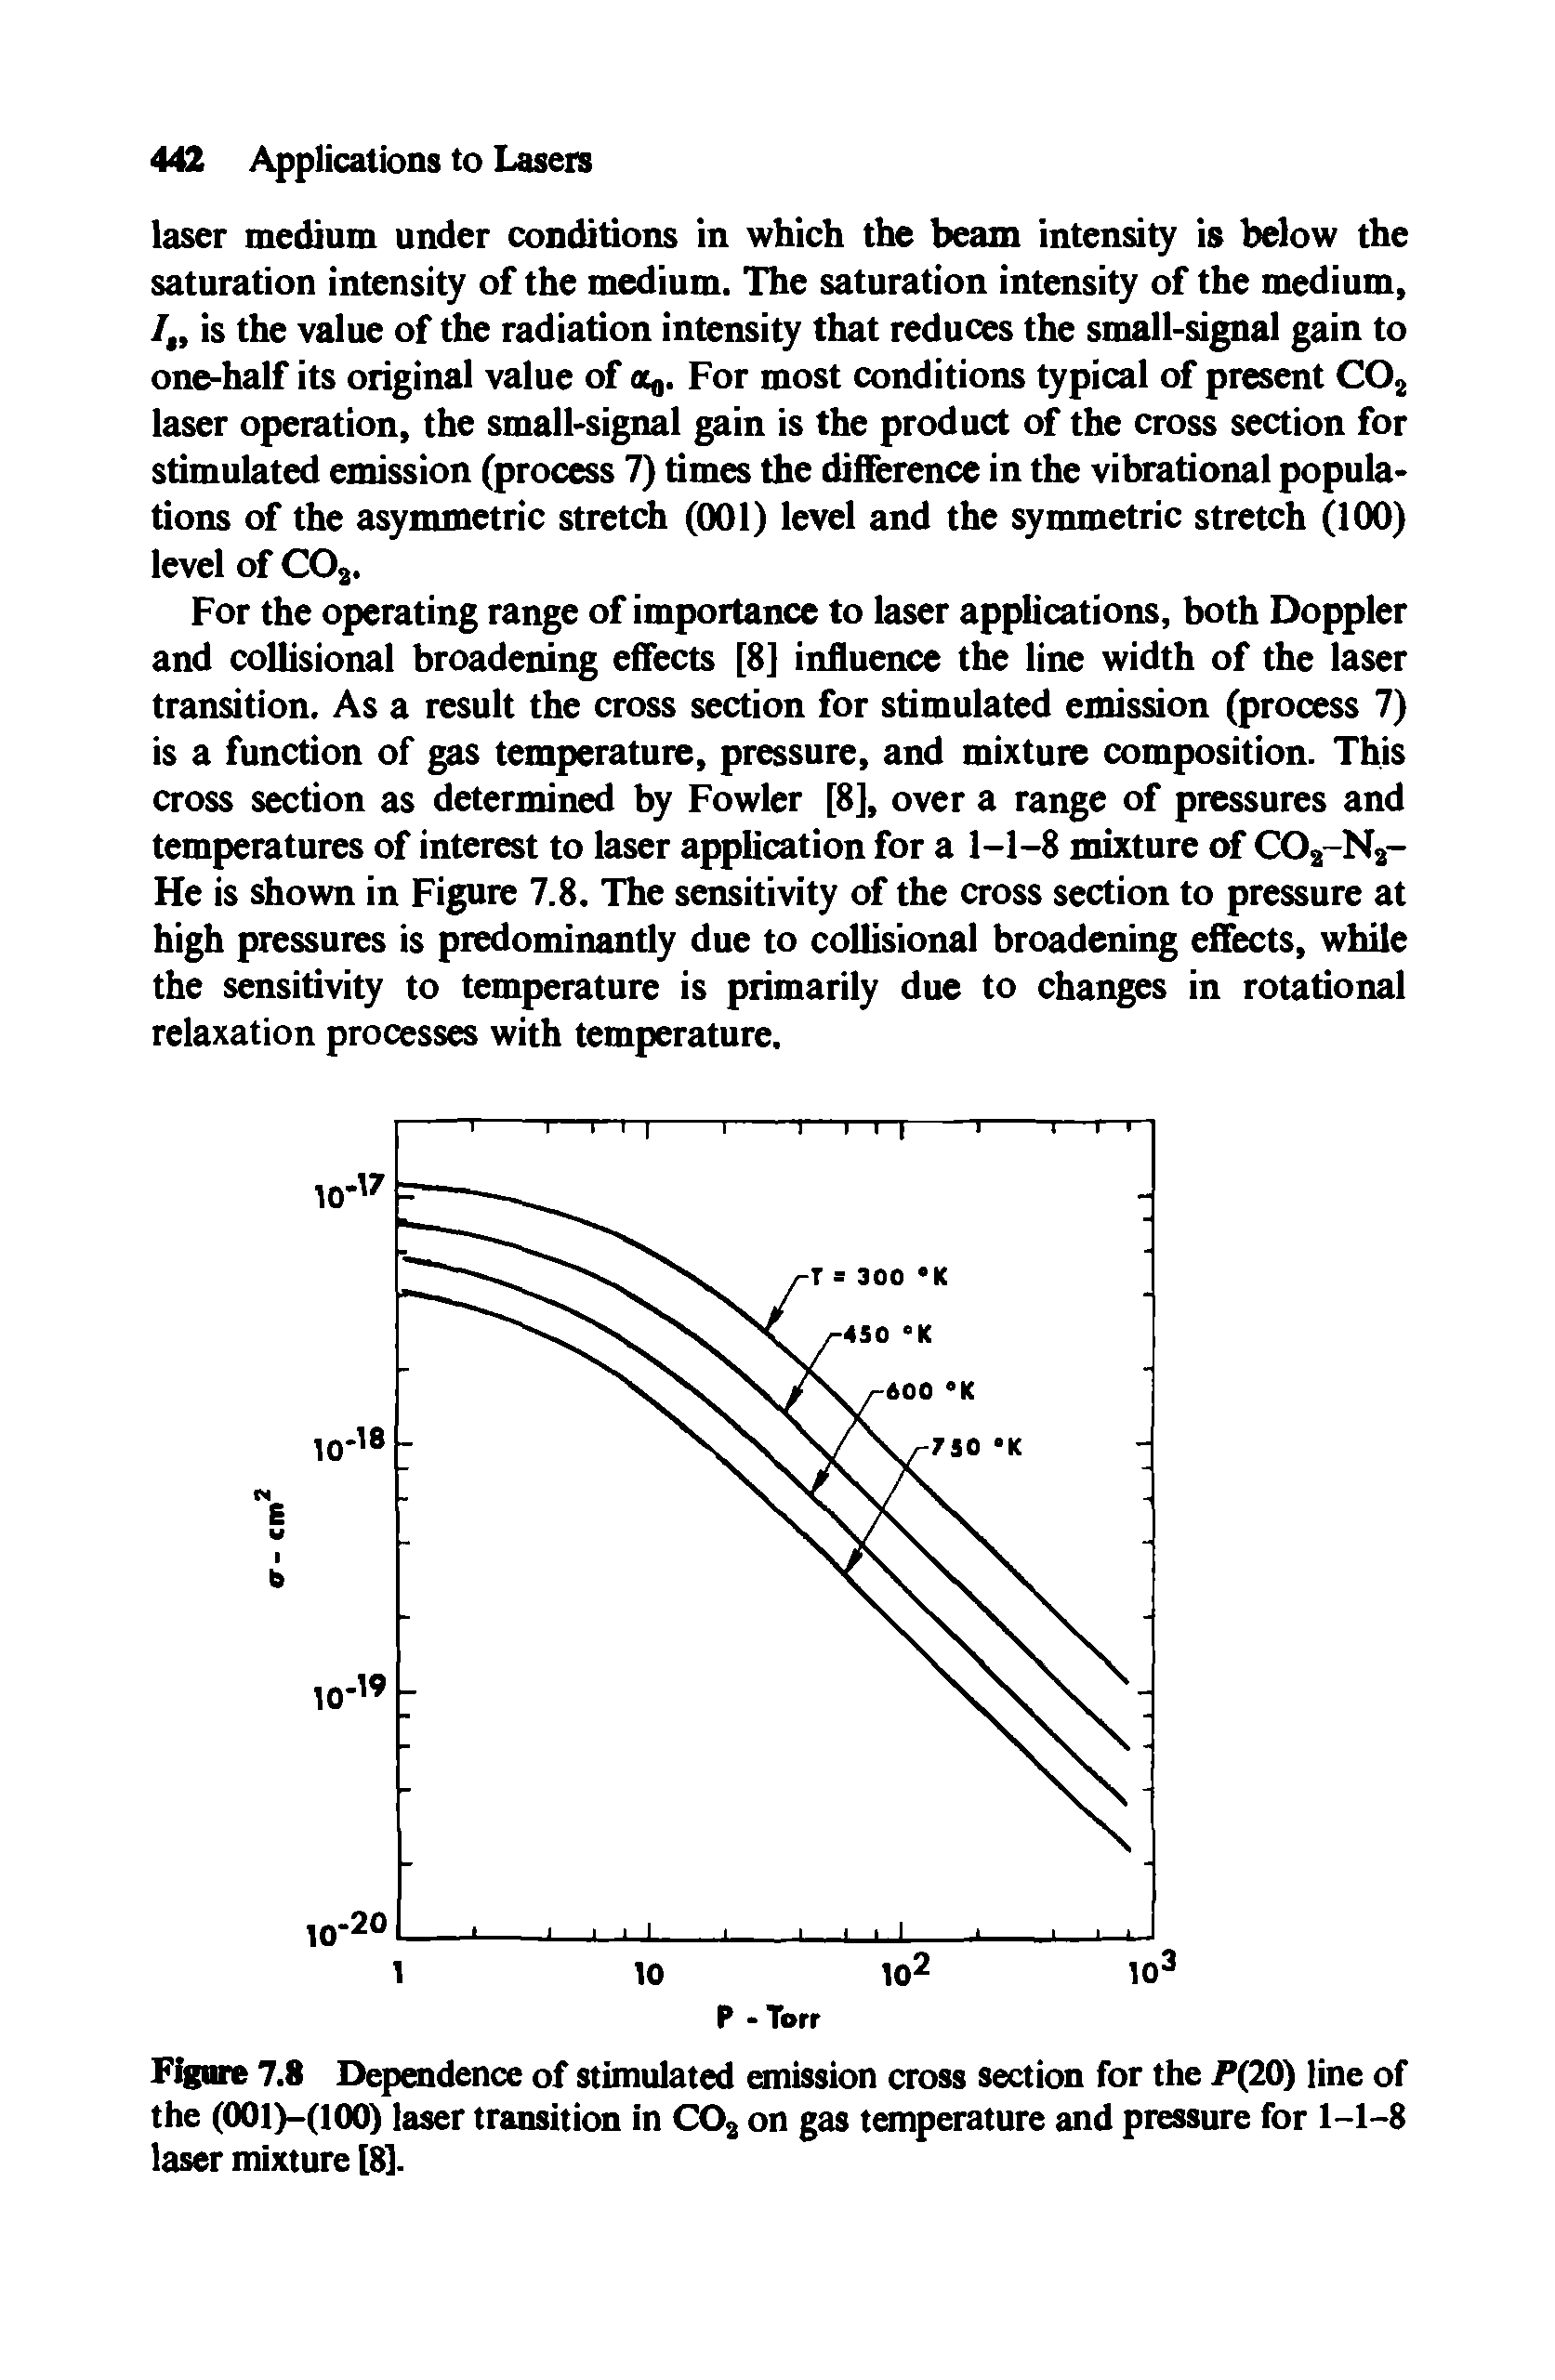 Figure 7.8 Dependence of stimulated emission cross section for the P(20) line of the (001)-(100) laser transition in COa on gas temperature and pressure for 1-1-8 laser mixture [8].